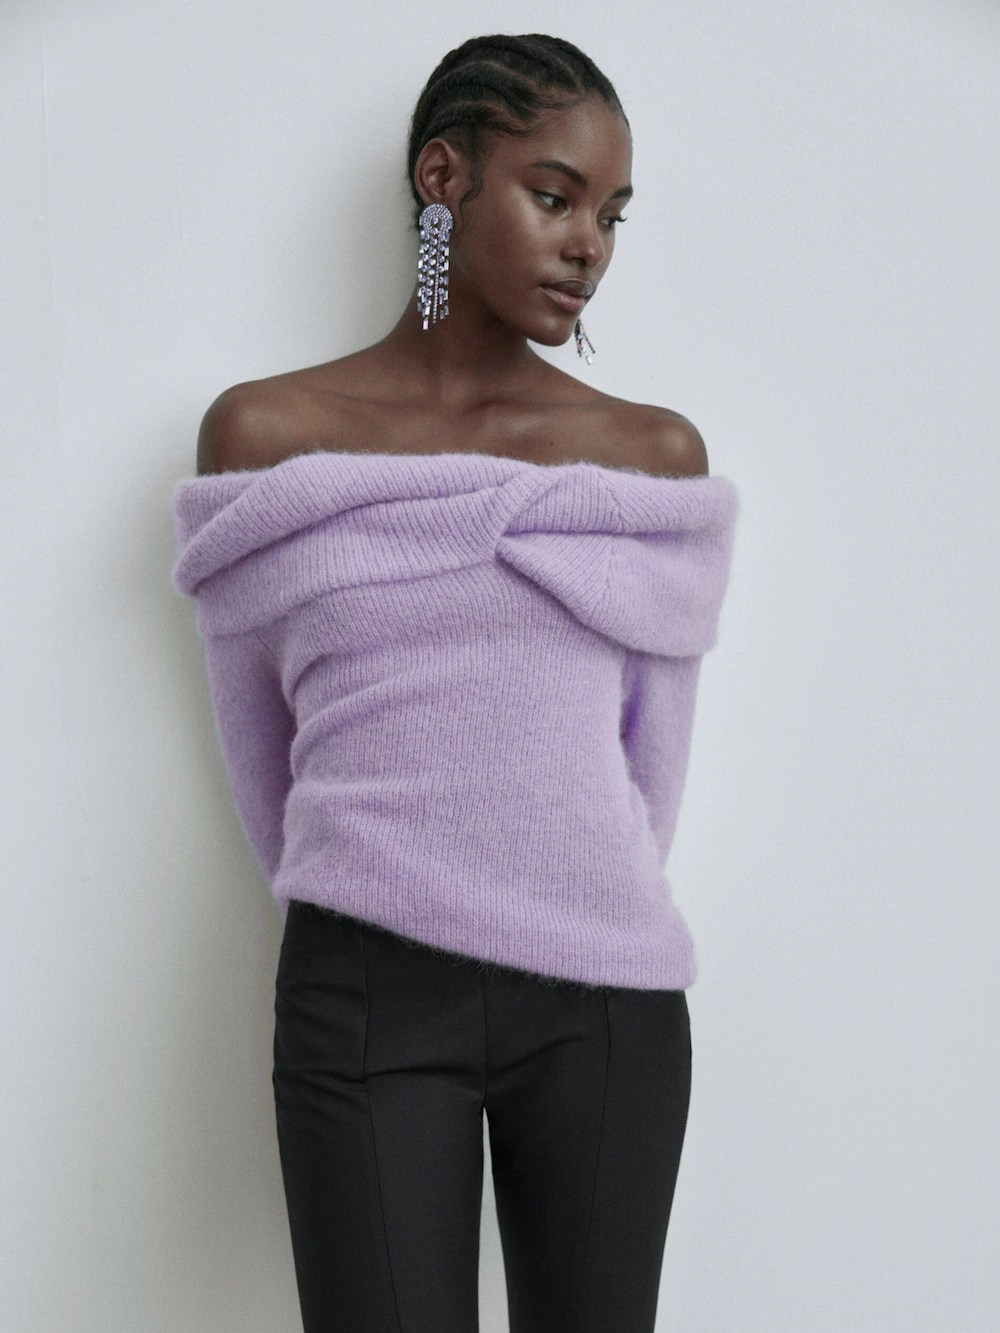 Massimo Dutti lilac sweater with double collar off shoulder detail.Close fitting with a flattering length to stylise the figure and an elegant double collar that shows off the shoulders, a key trend for spring/summer 2023. 

